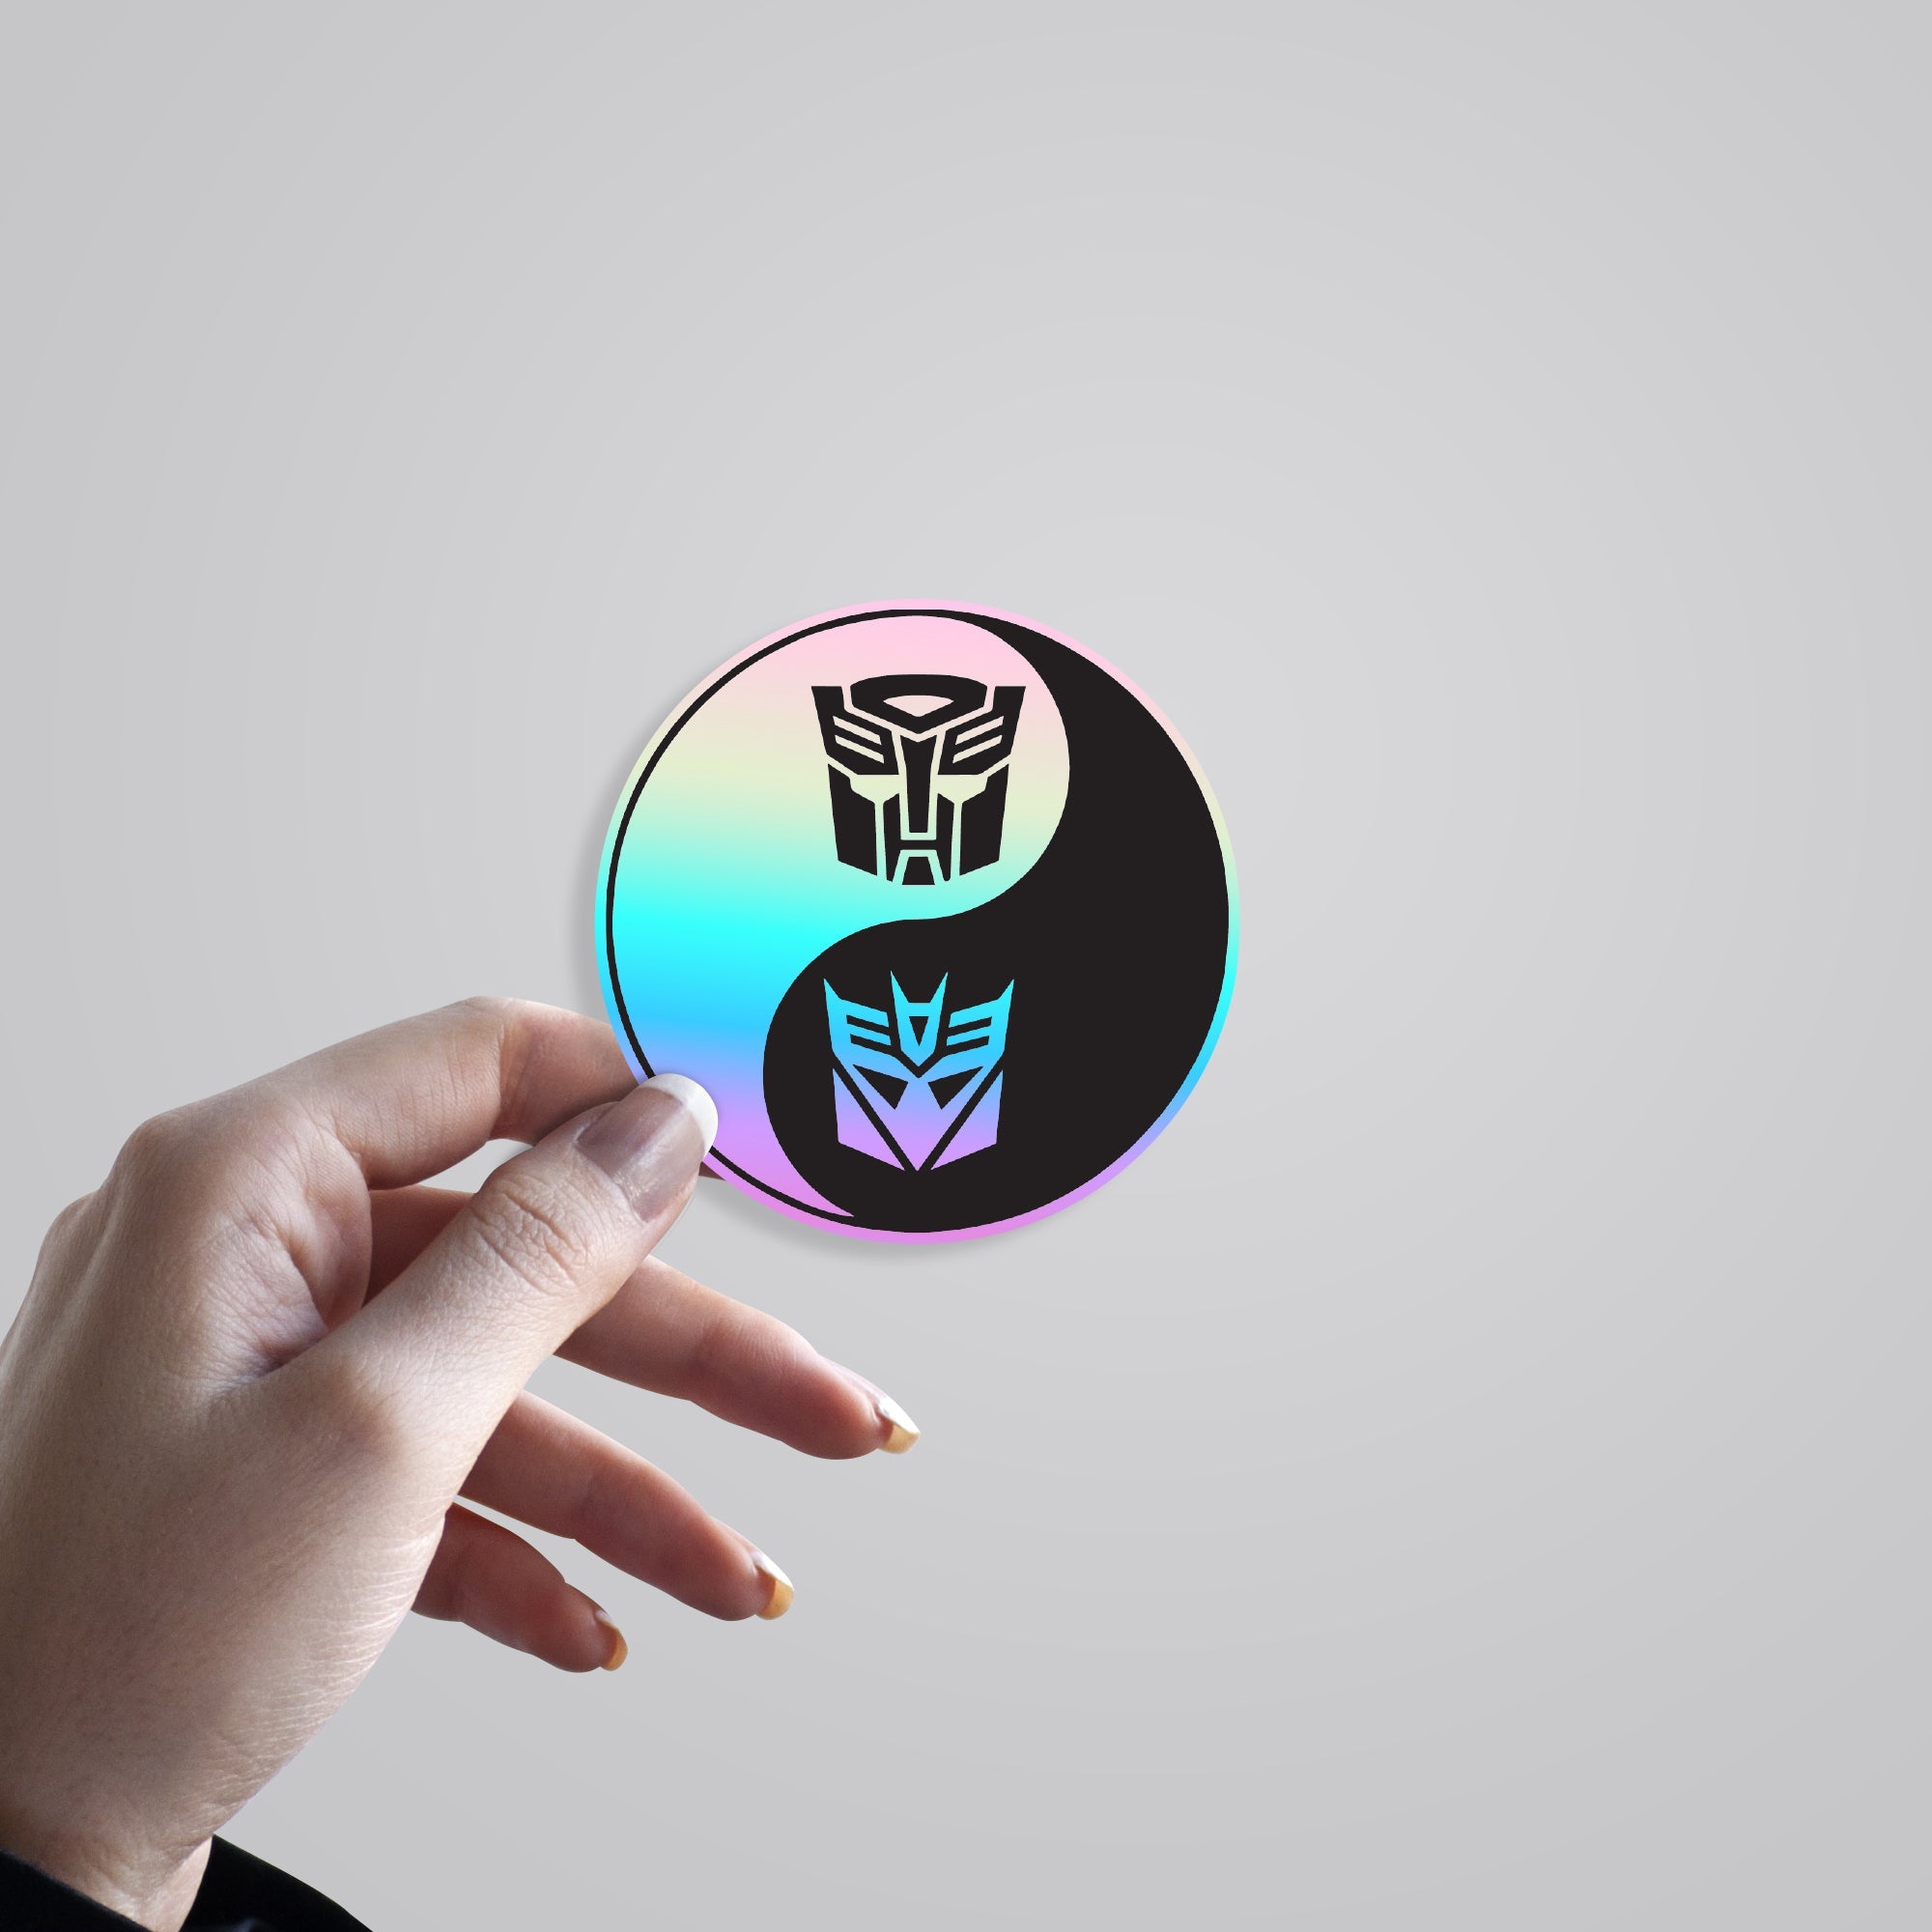 Autobot & Deception in Black & White Holographic Stickers